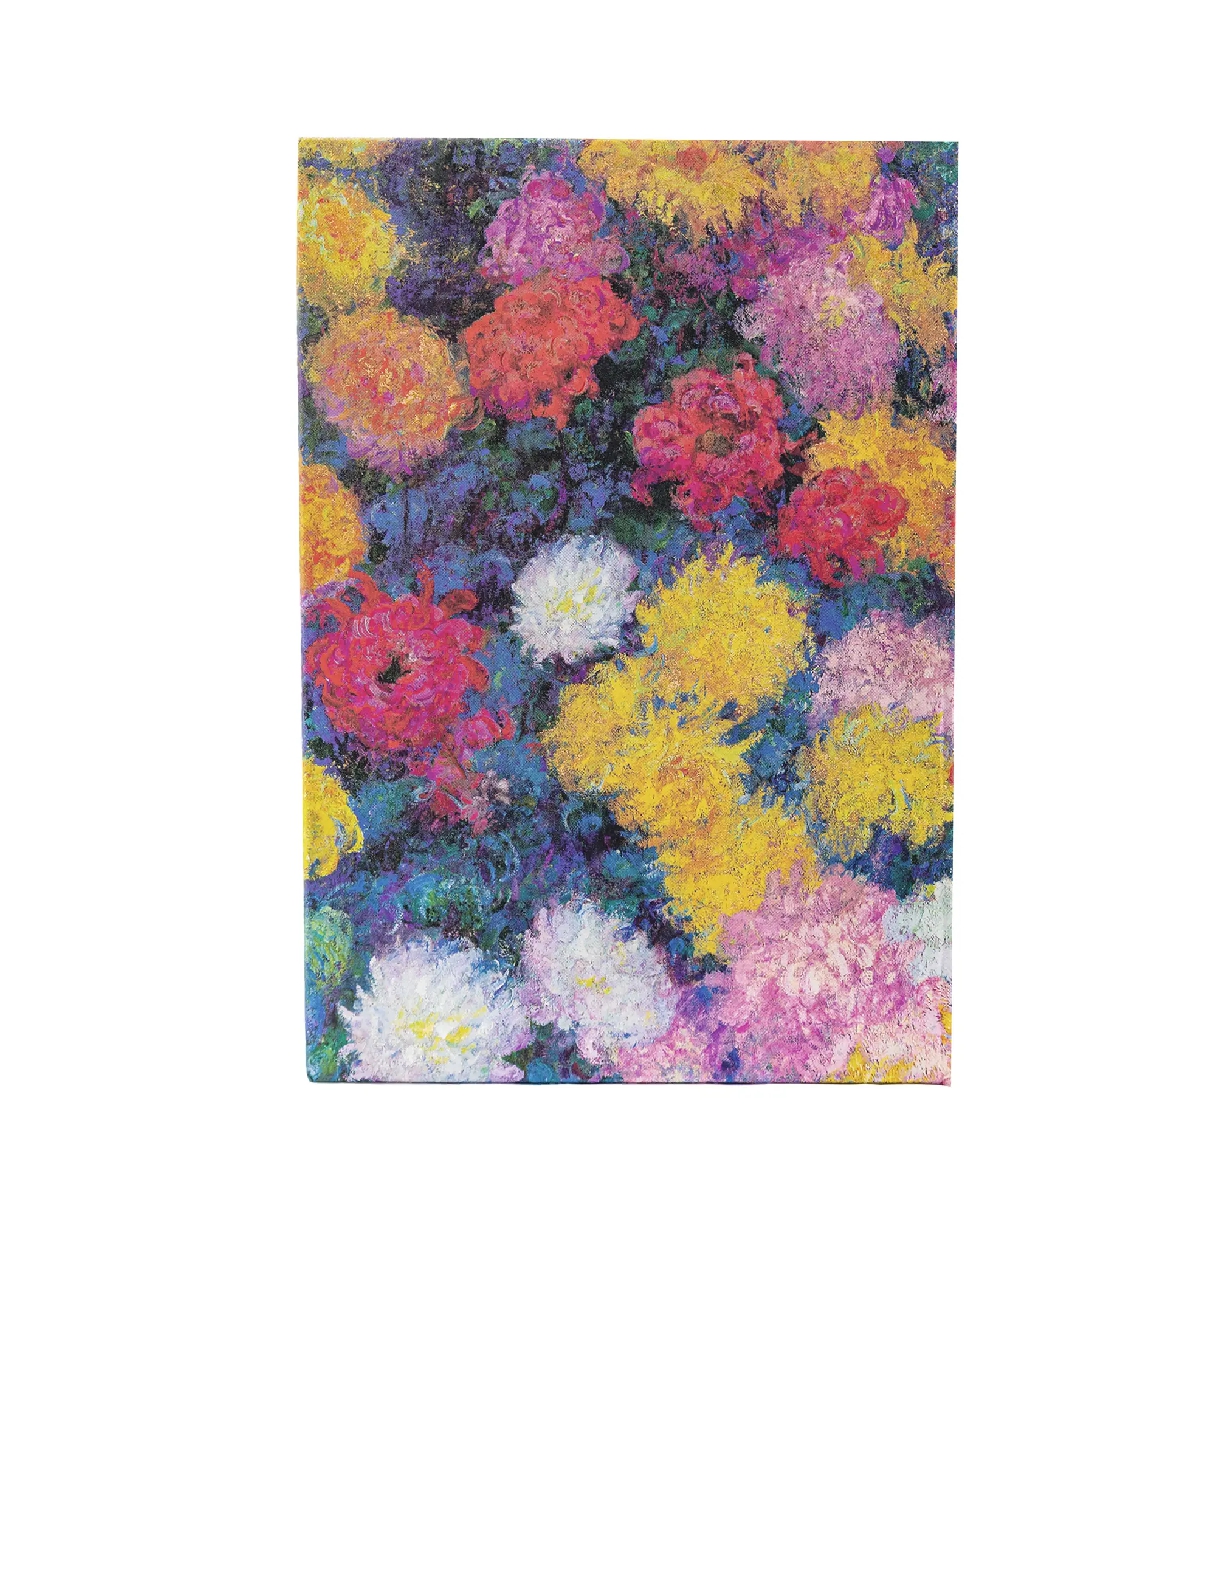 Monet's Chrysanthemums, Hardcover Journals, Midi, Unlined, Elastic Band, 144 Pg, 120 GSM